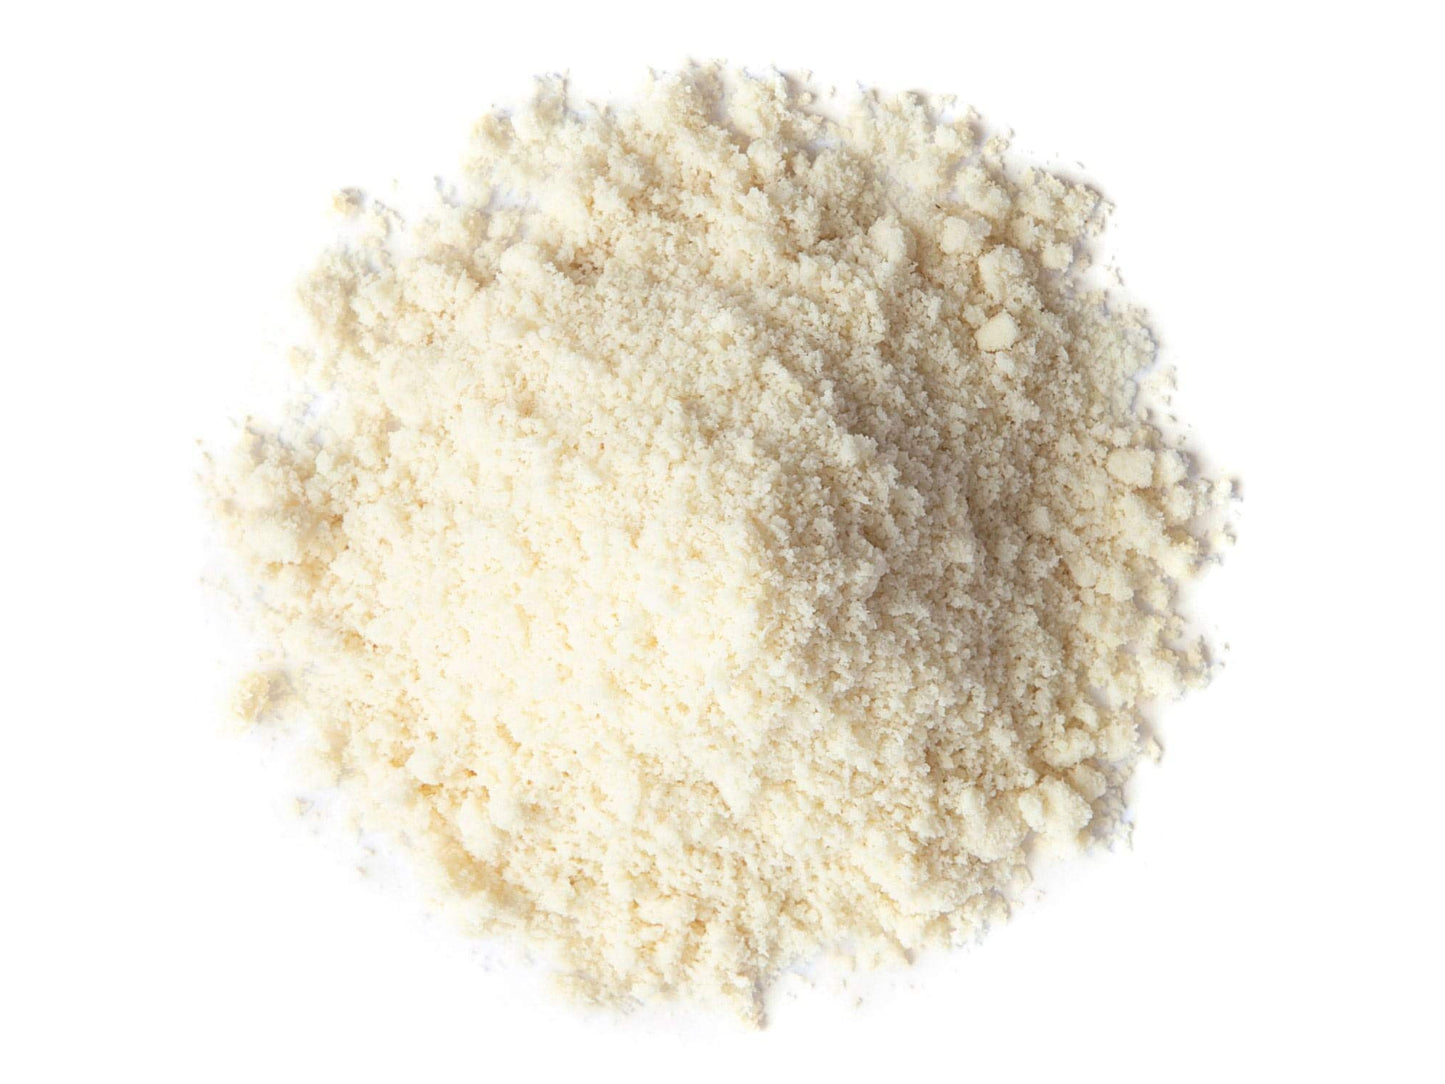 Blanched Almond Flour — Non-GMO Verified, Finely Milled, Raw, Vegan, Keto, Paleo, Kosher, Bulk, Low Sodium, Low Carb. Good Source of Fiber, Protein, Vitamin E, Copper and Riboflavin